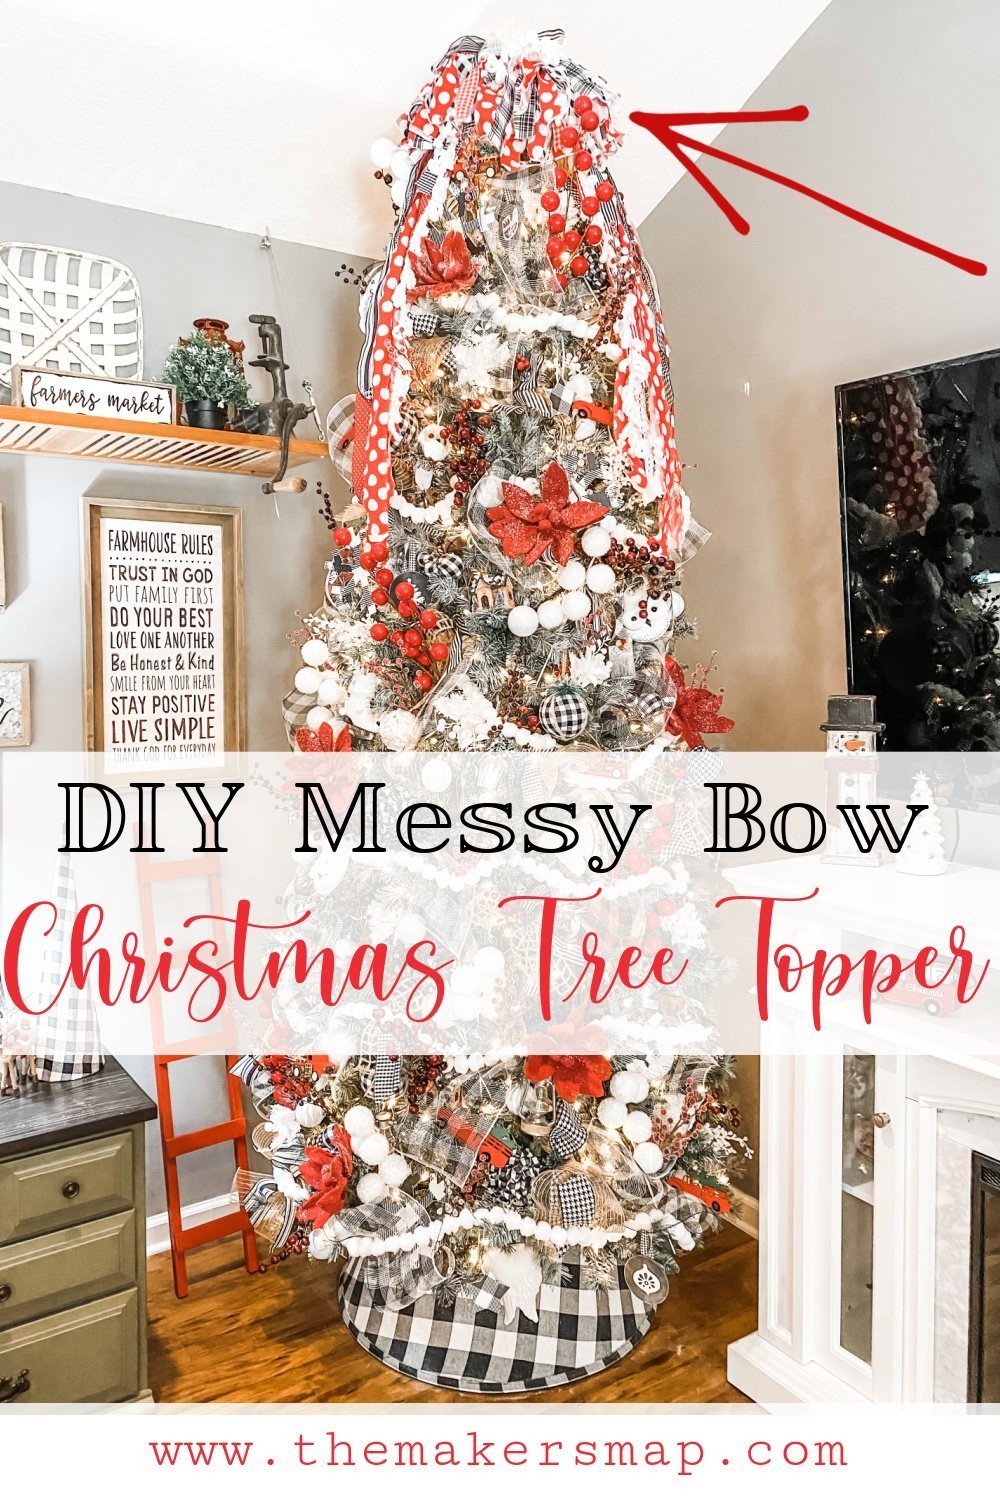 How to Make a Messy Bow Christmas Tree Topper